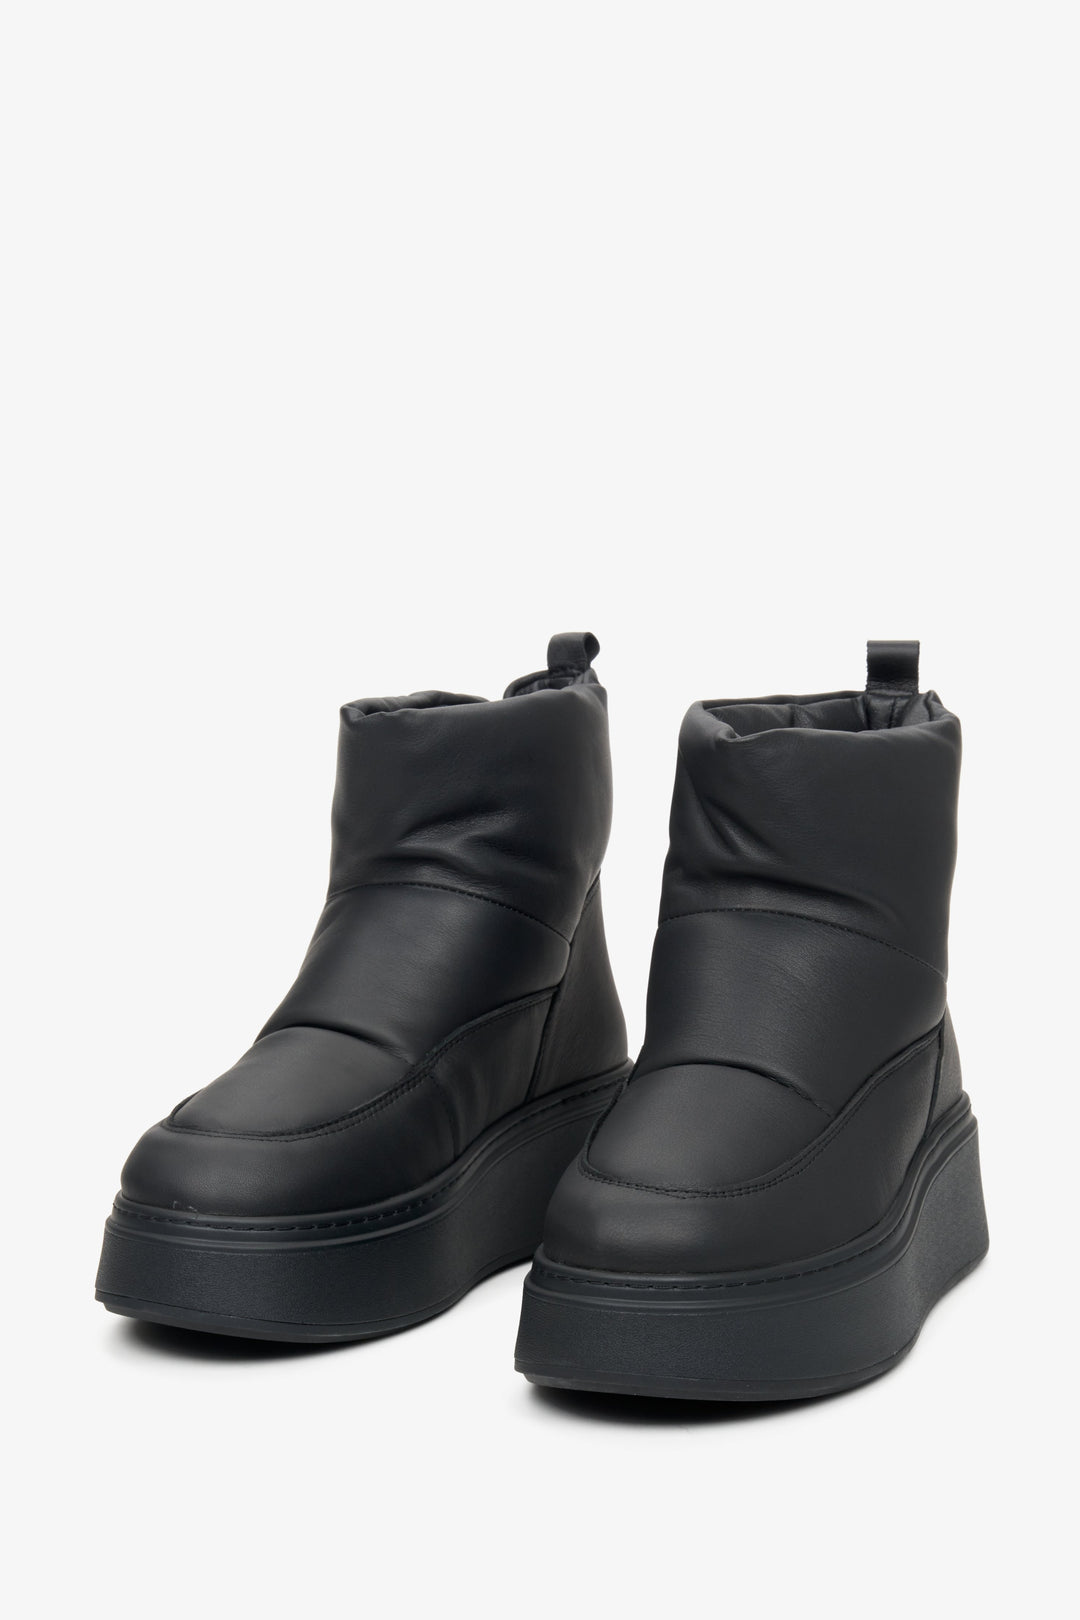 Winter women's snow boots by Estro, made of genuine leather with natural black fur lining.